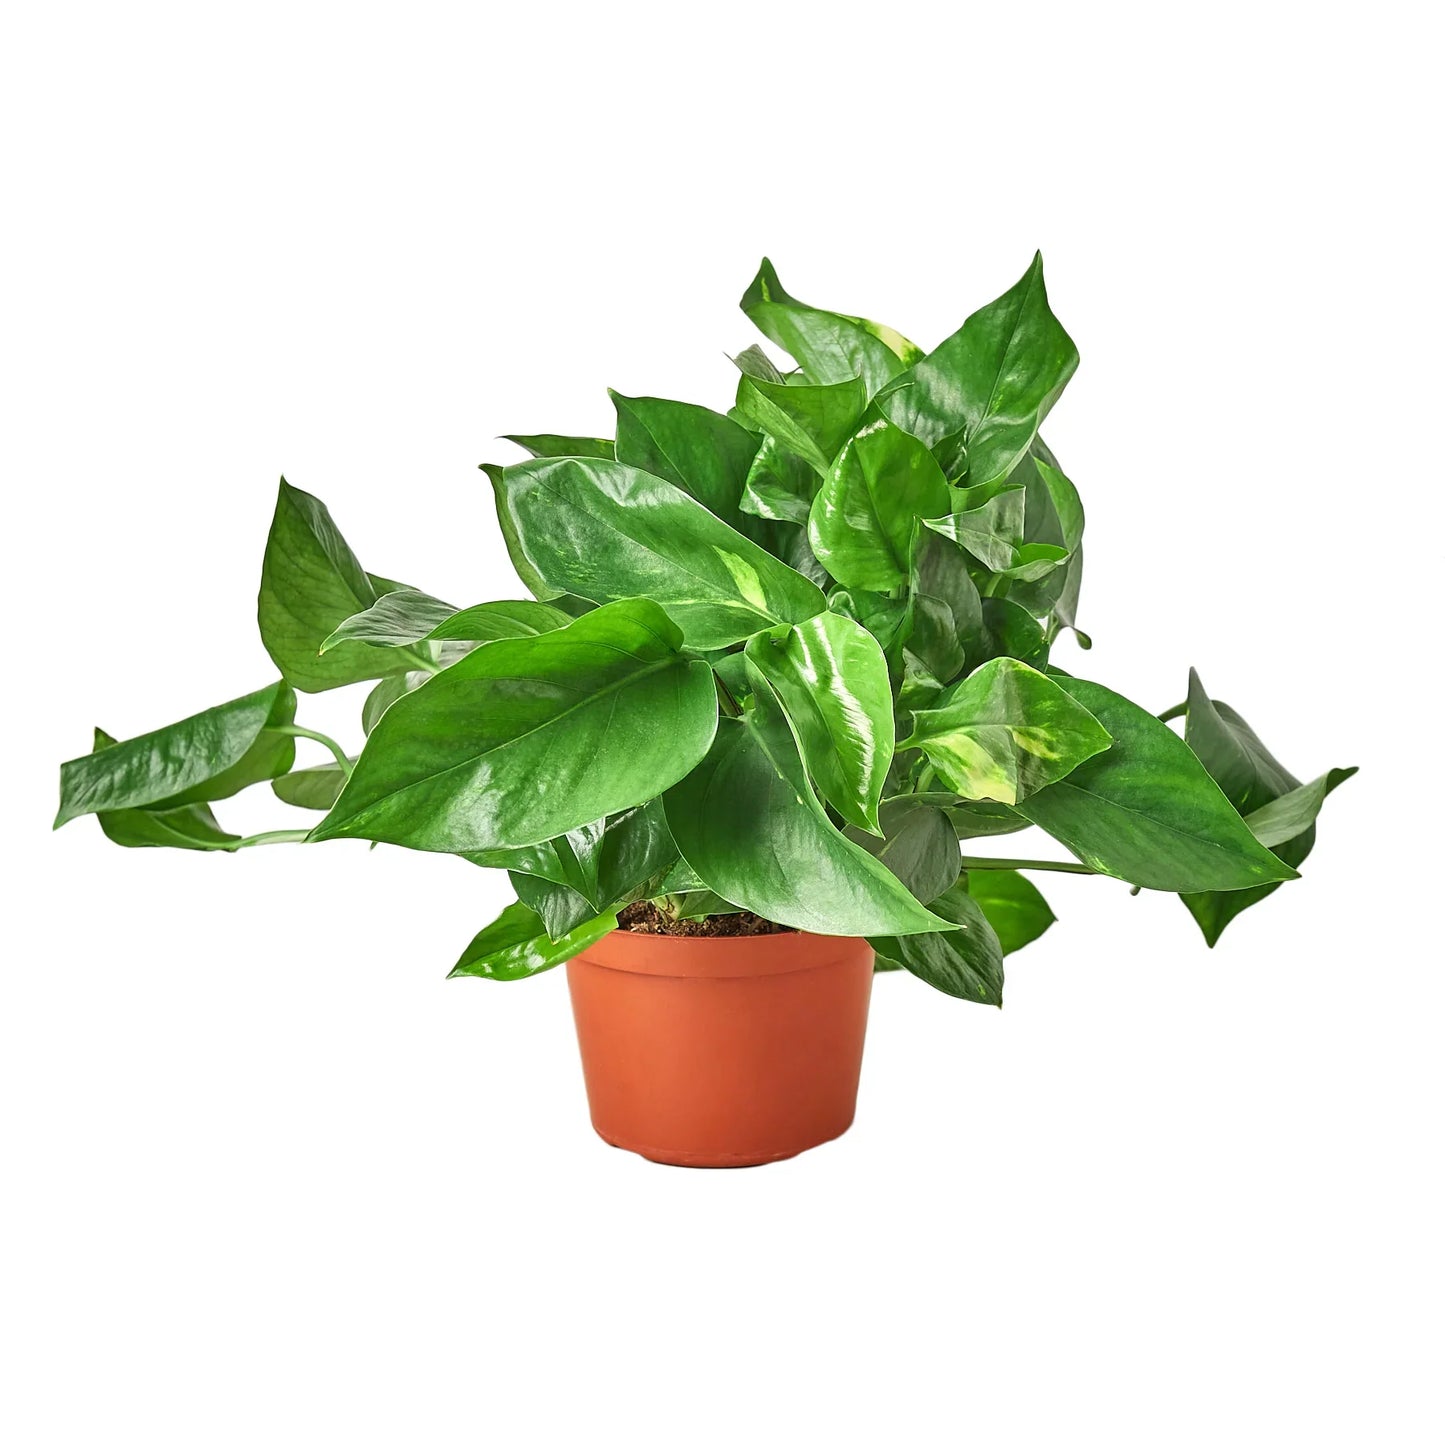 Pothos 'Golden' - Easy Care, Air-Purifying Indoor Vine Plant